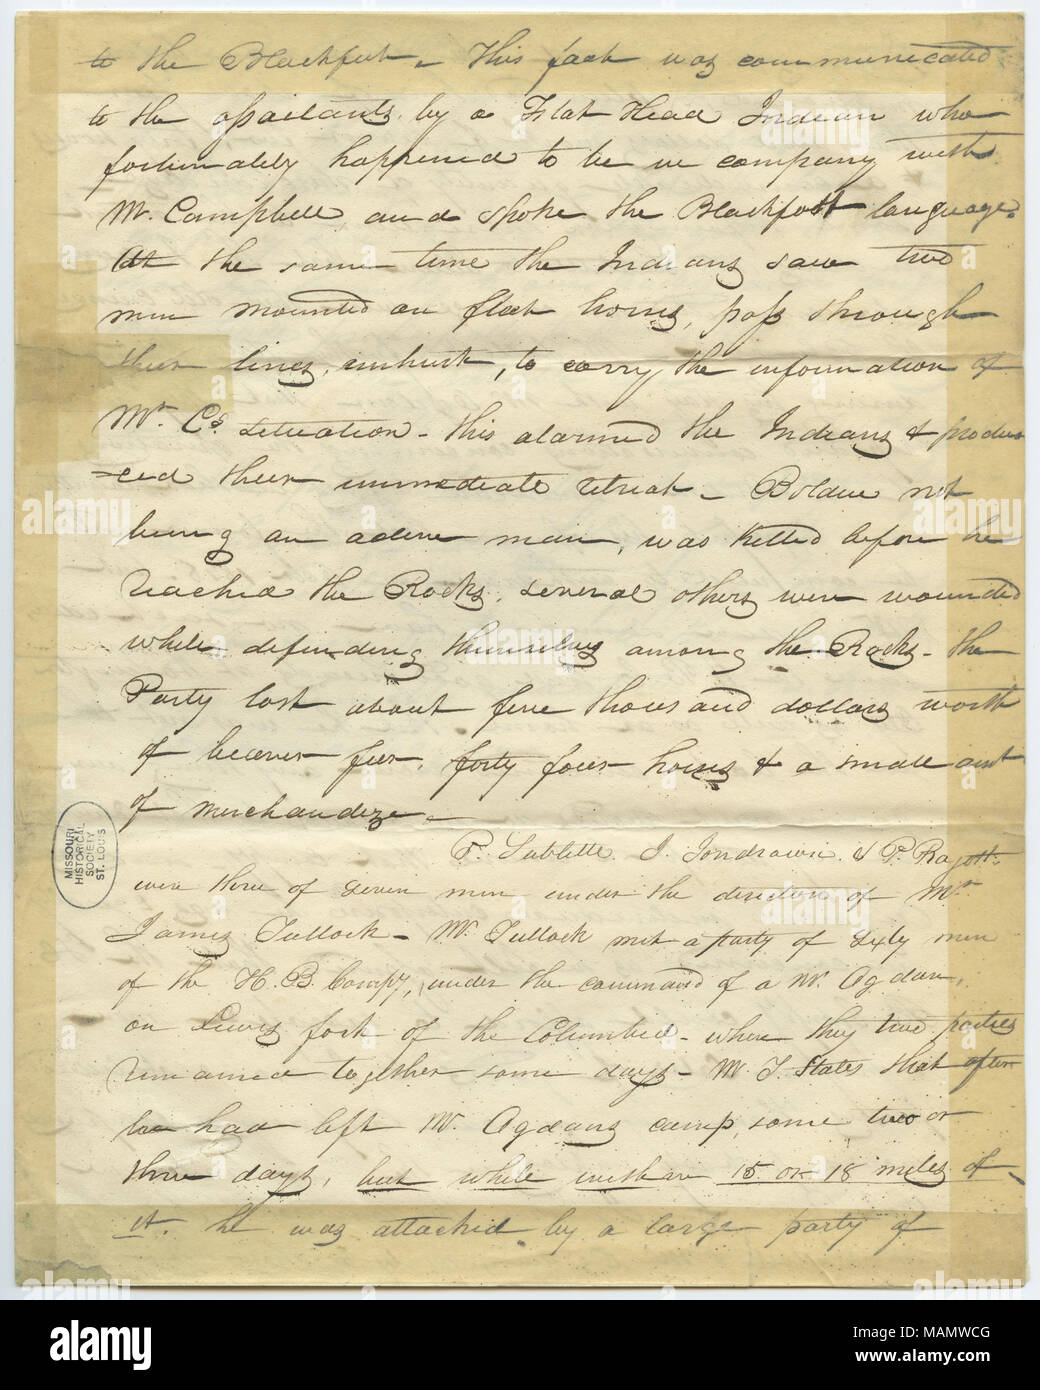 Fragment of letter of William H. Ashley begins: “. . . to the Blackfeet -- This fact was communicated . . .”, page 1, ca. January 20, 1829. William Henry Ashley Collection, Missouri History Museum Archives, St. Louis. ID Number=A0059-00068. File Name=A0059-00068 0001. Stock Photo